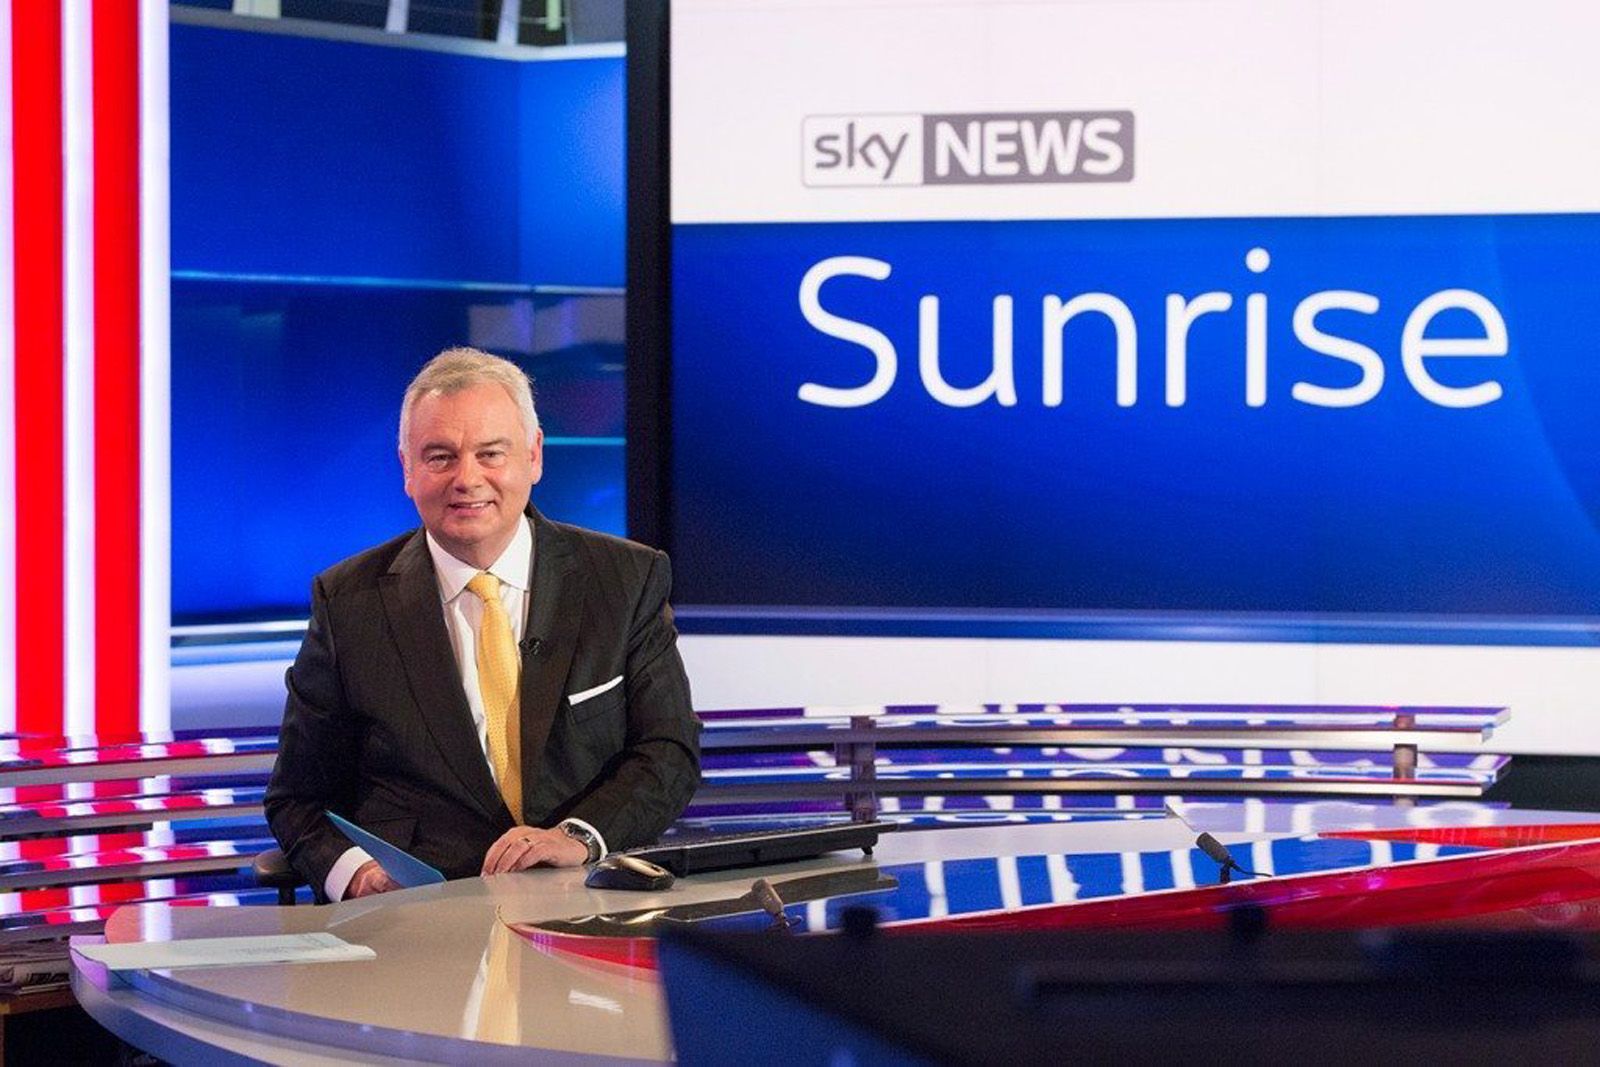 Sky News may end up being sold to Disney separately from the rest of Sky image 1